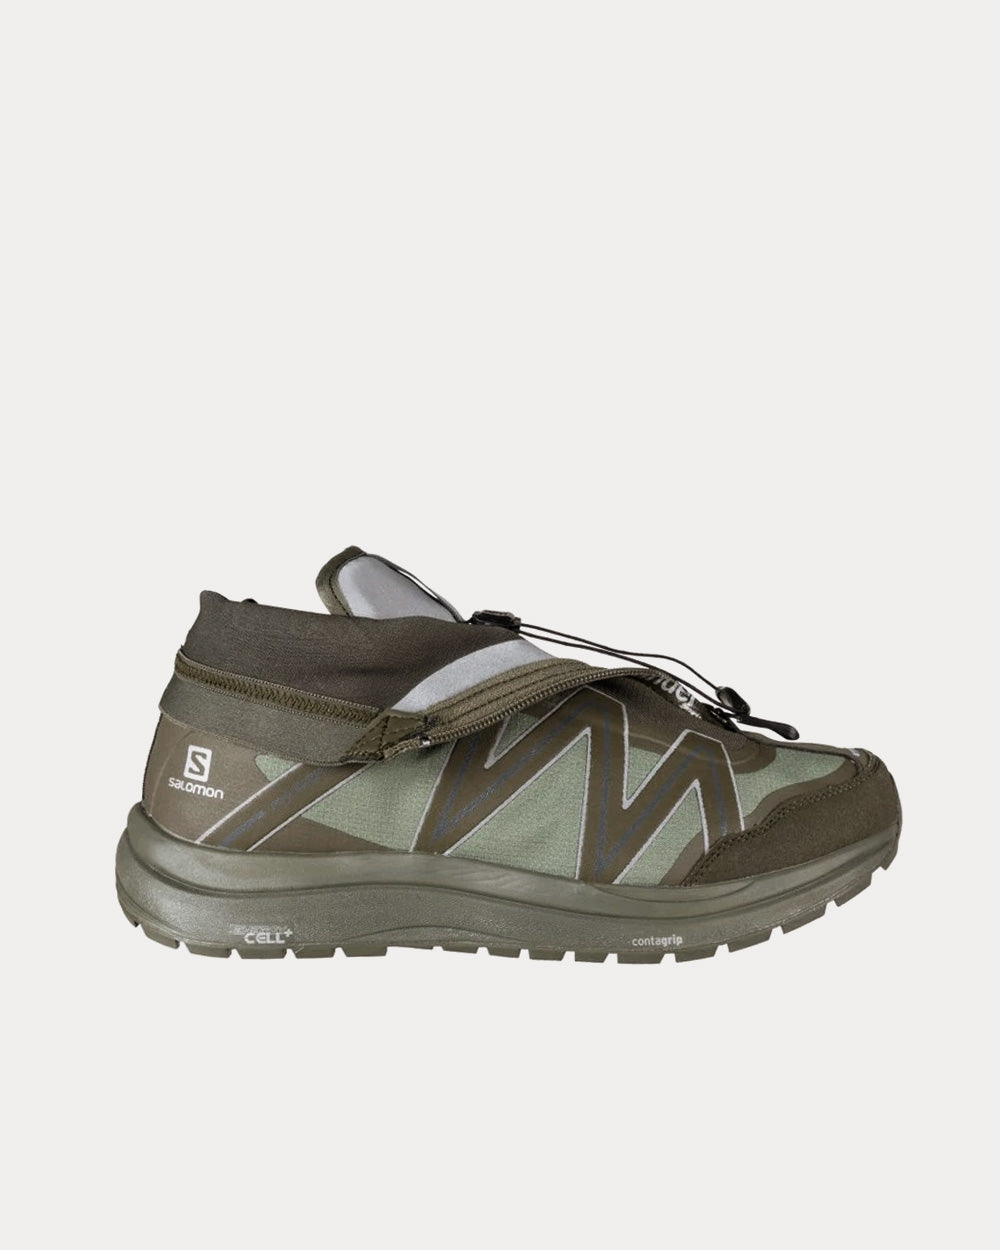 Salomon x And Wander - x and Wander Odyssey CSWP Khaki High Top Sneakers